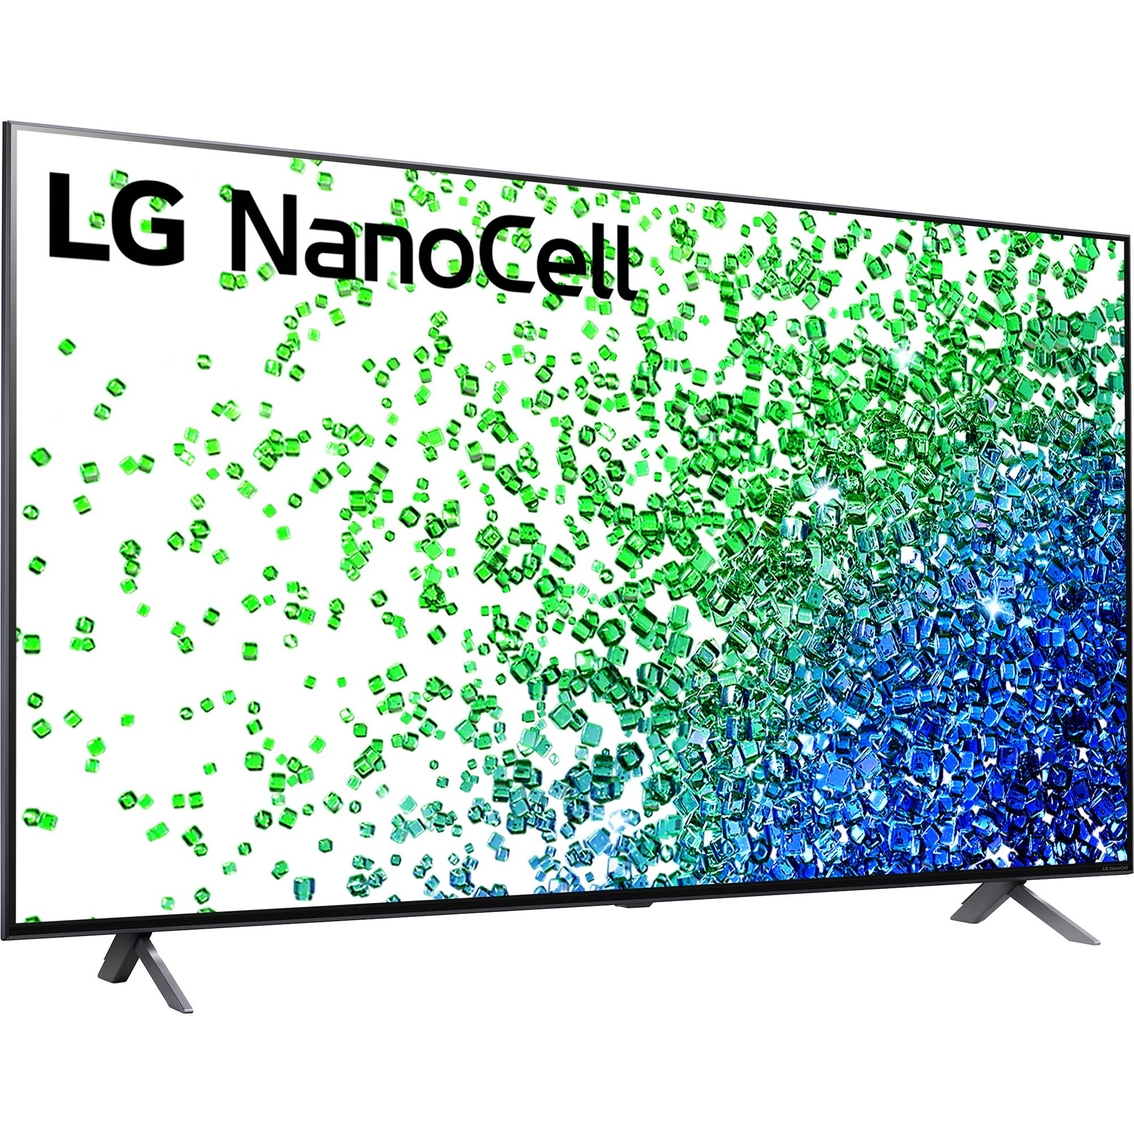 LG 50 in. 80-Series NanoCell 4K HDR Smart TV with AI ThinQ 50NANO80UPA - Image 3 of 9